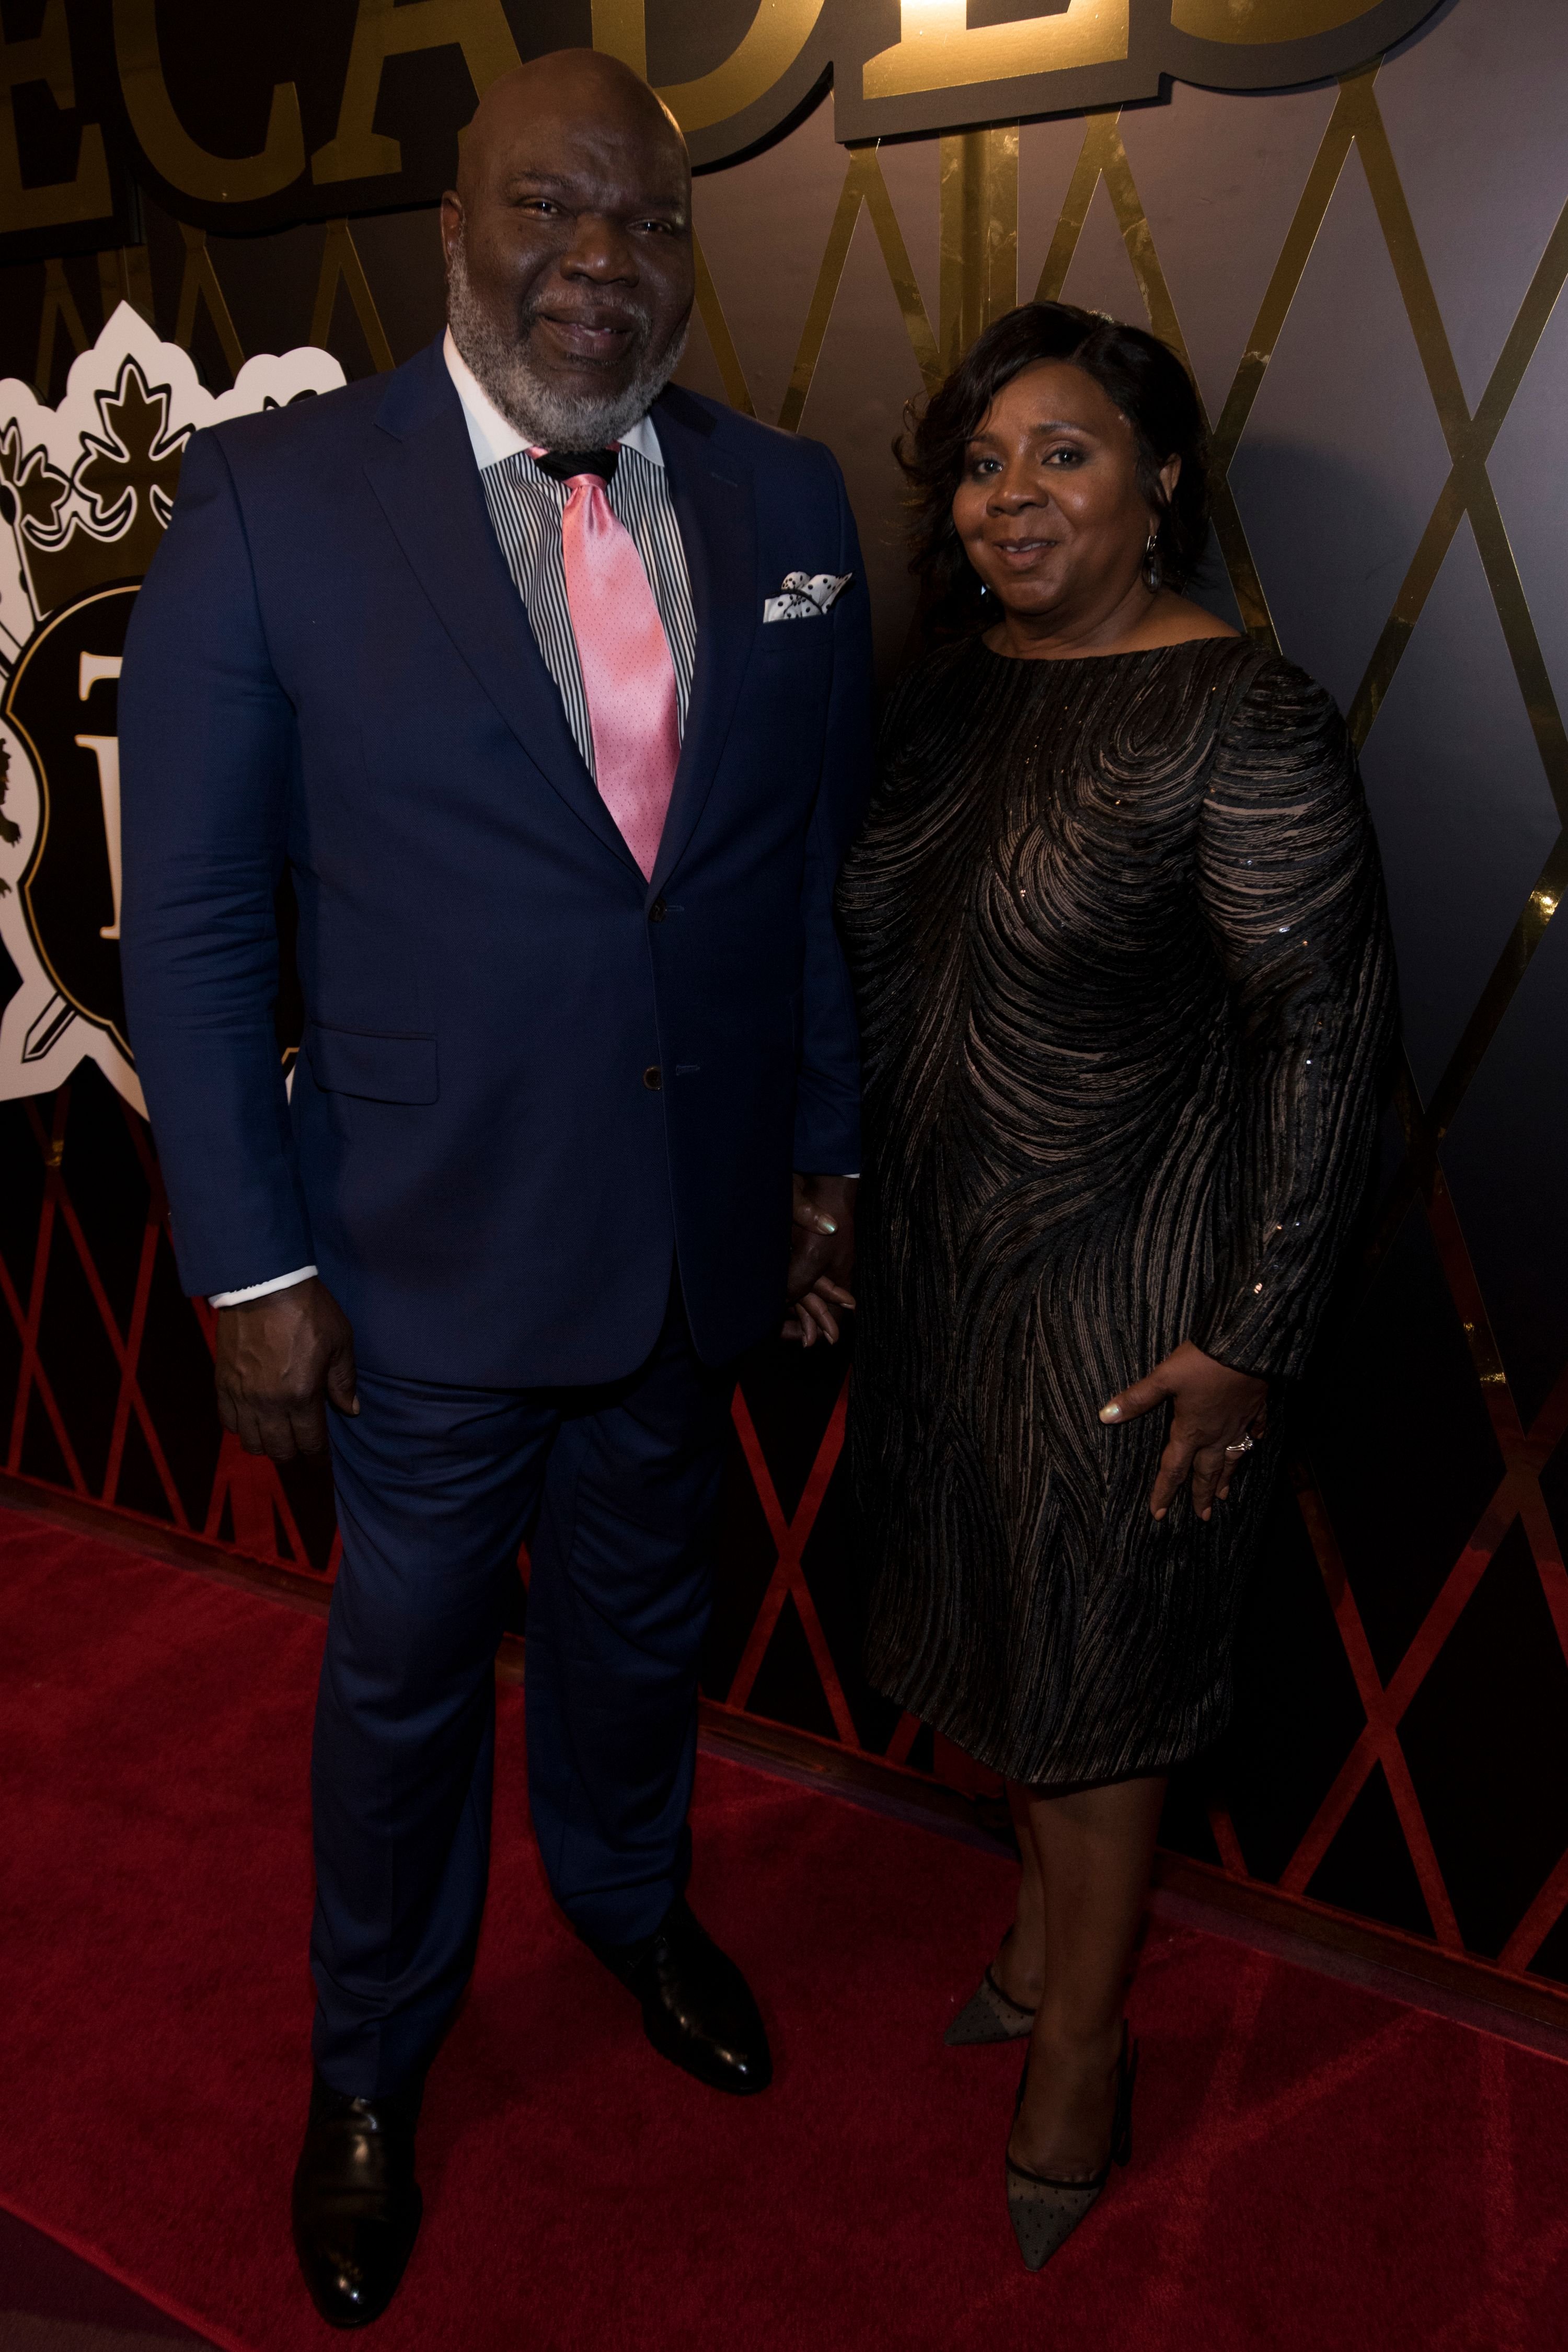 T.D. and Serita Jakes at the Bishop’s 60th birthday celebration on June 30, 2017 in Dallas. | Photo: Getty Images